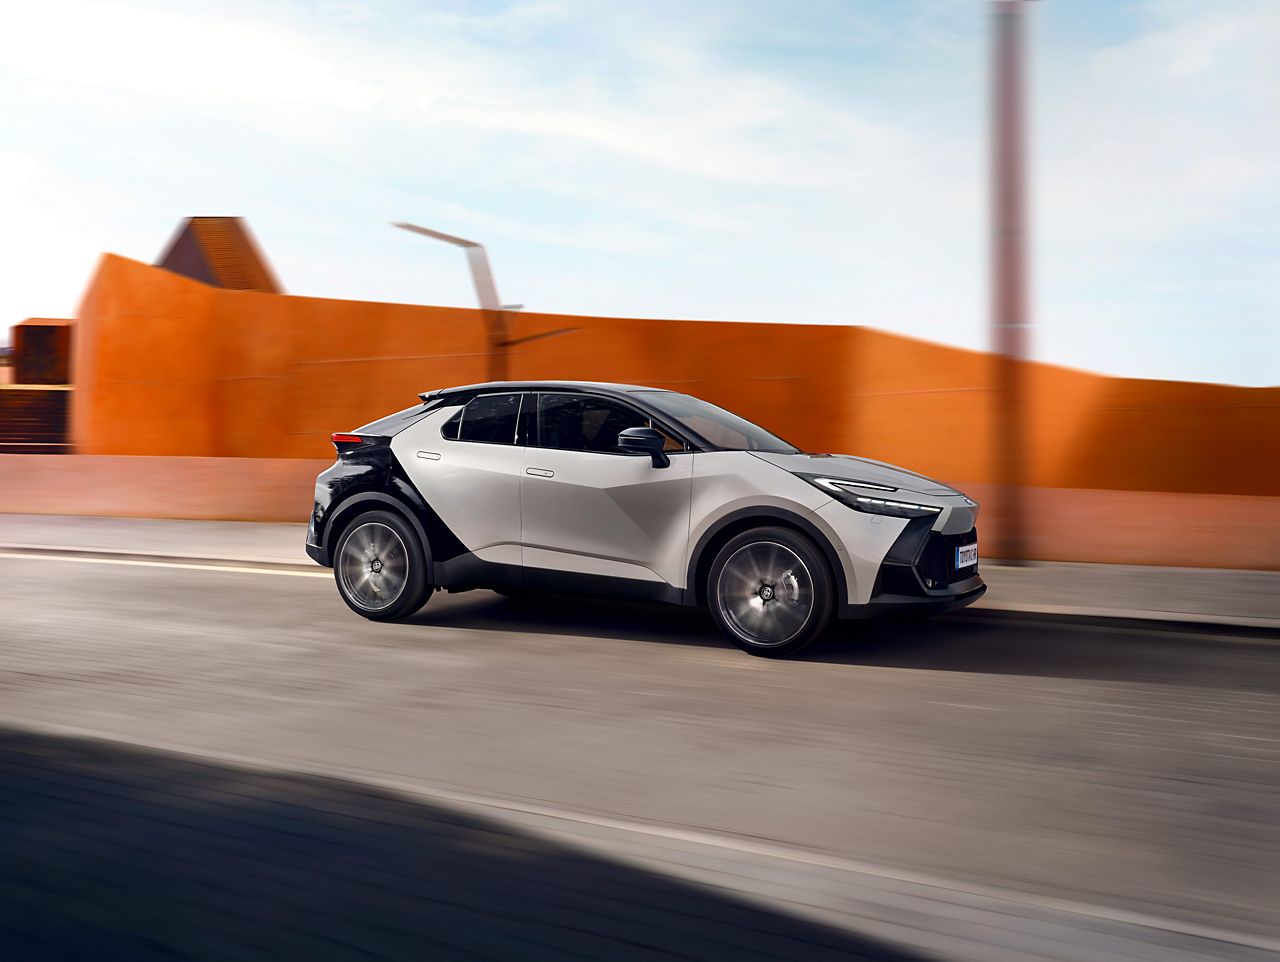 https://scene7.toyota.eu/is/image/toyotaeurope/TOY_C-HR_2023_LAUNCH_HUB_CON_IMG_BANK_02-v6?wid=1280&fit=fit,1&ts=1697141500391&resMode=sharp2&op_usm=1.75,0.3,2,0